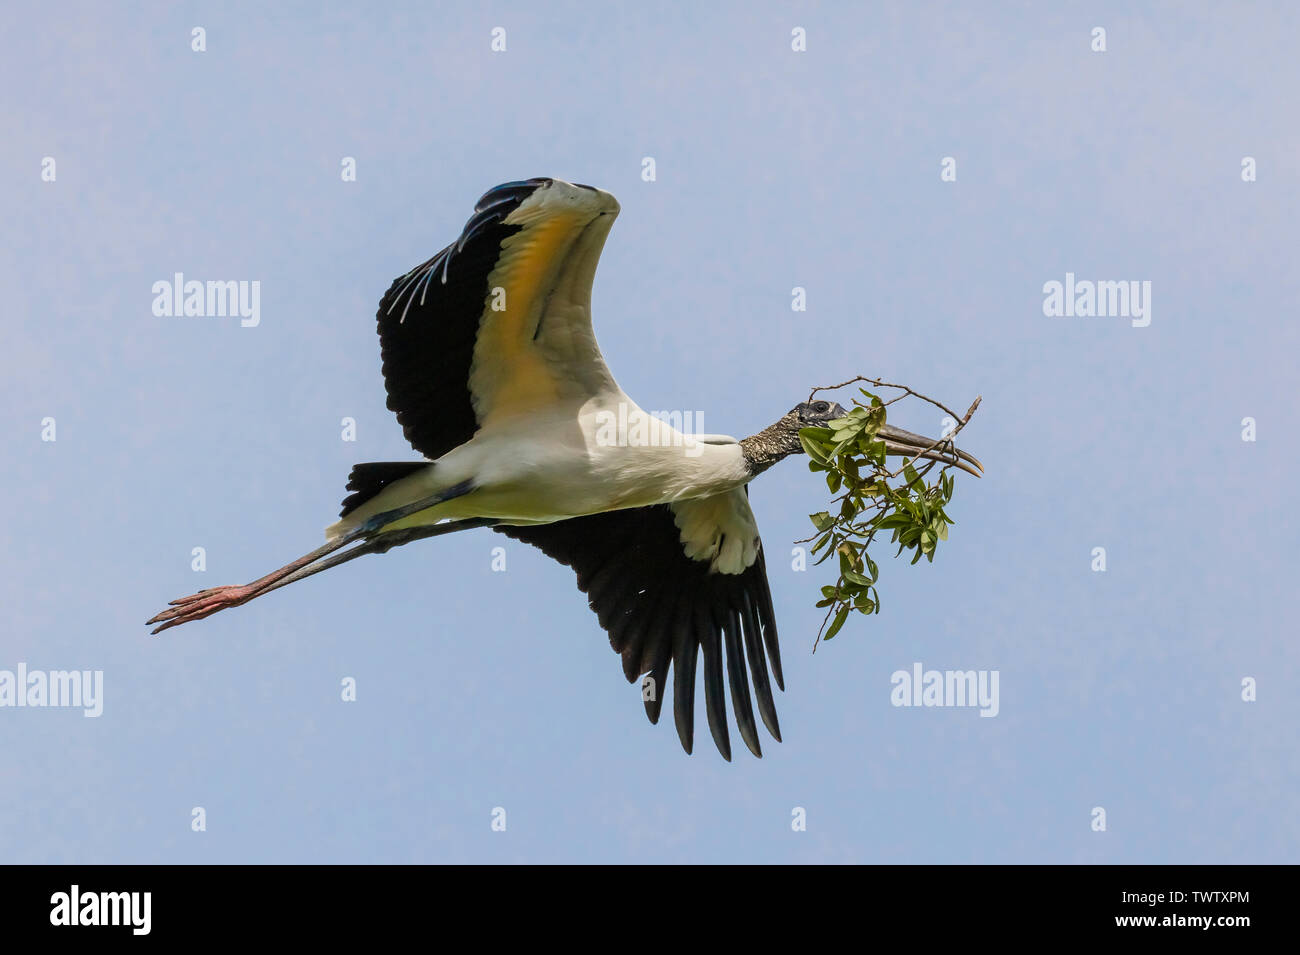 An American Woodstork flying overhead carry twig nesting material Stock Photo